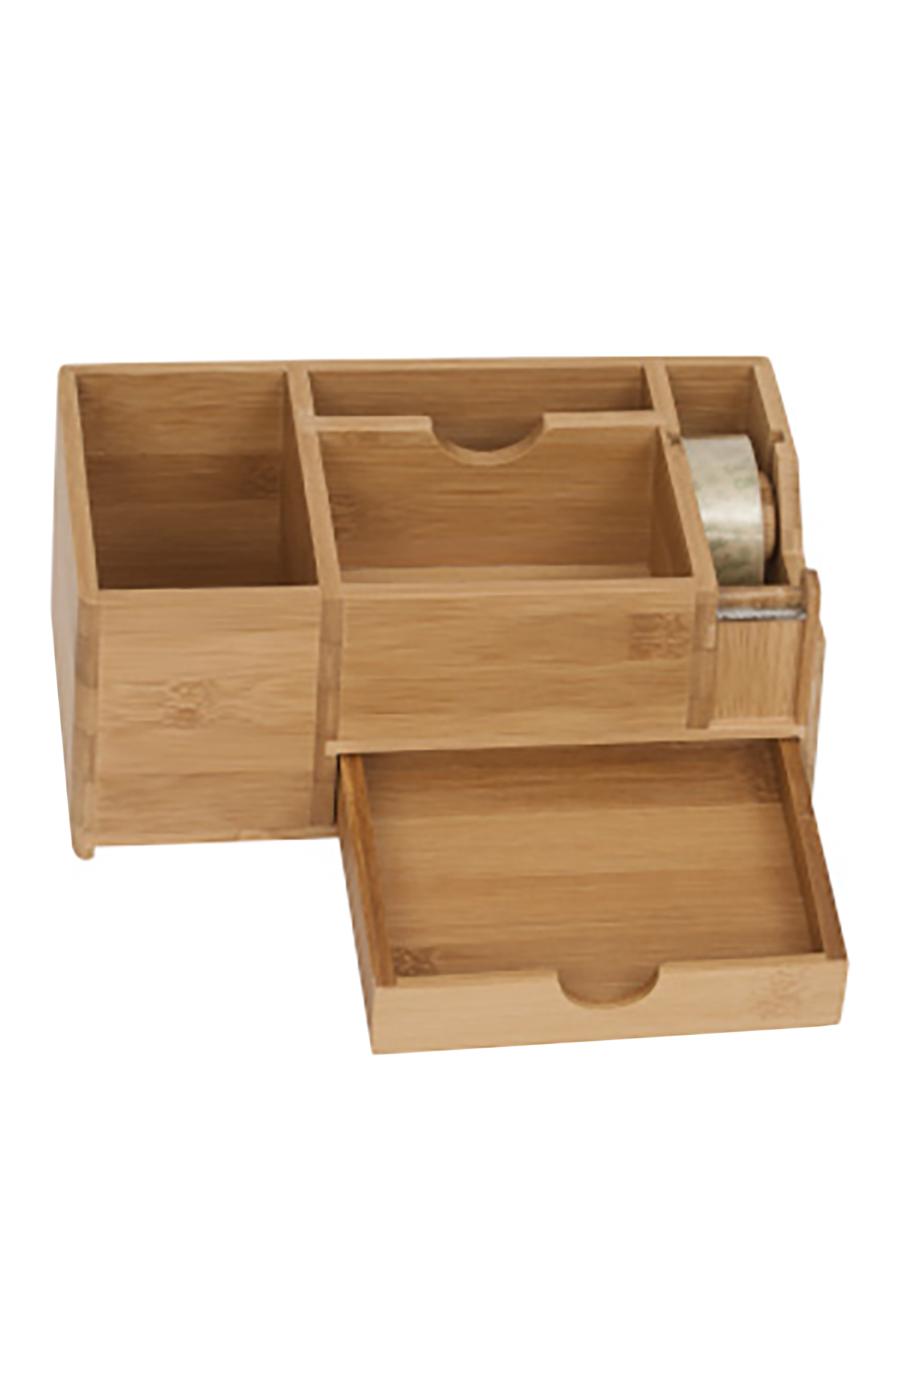 Merangue Bamboo Collection Desktop Holder with Drawer; image 2 of 2